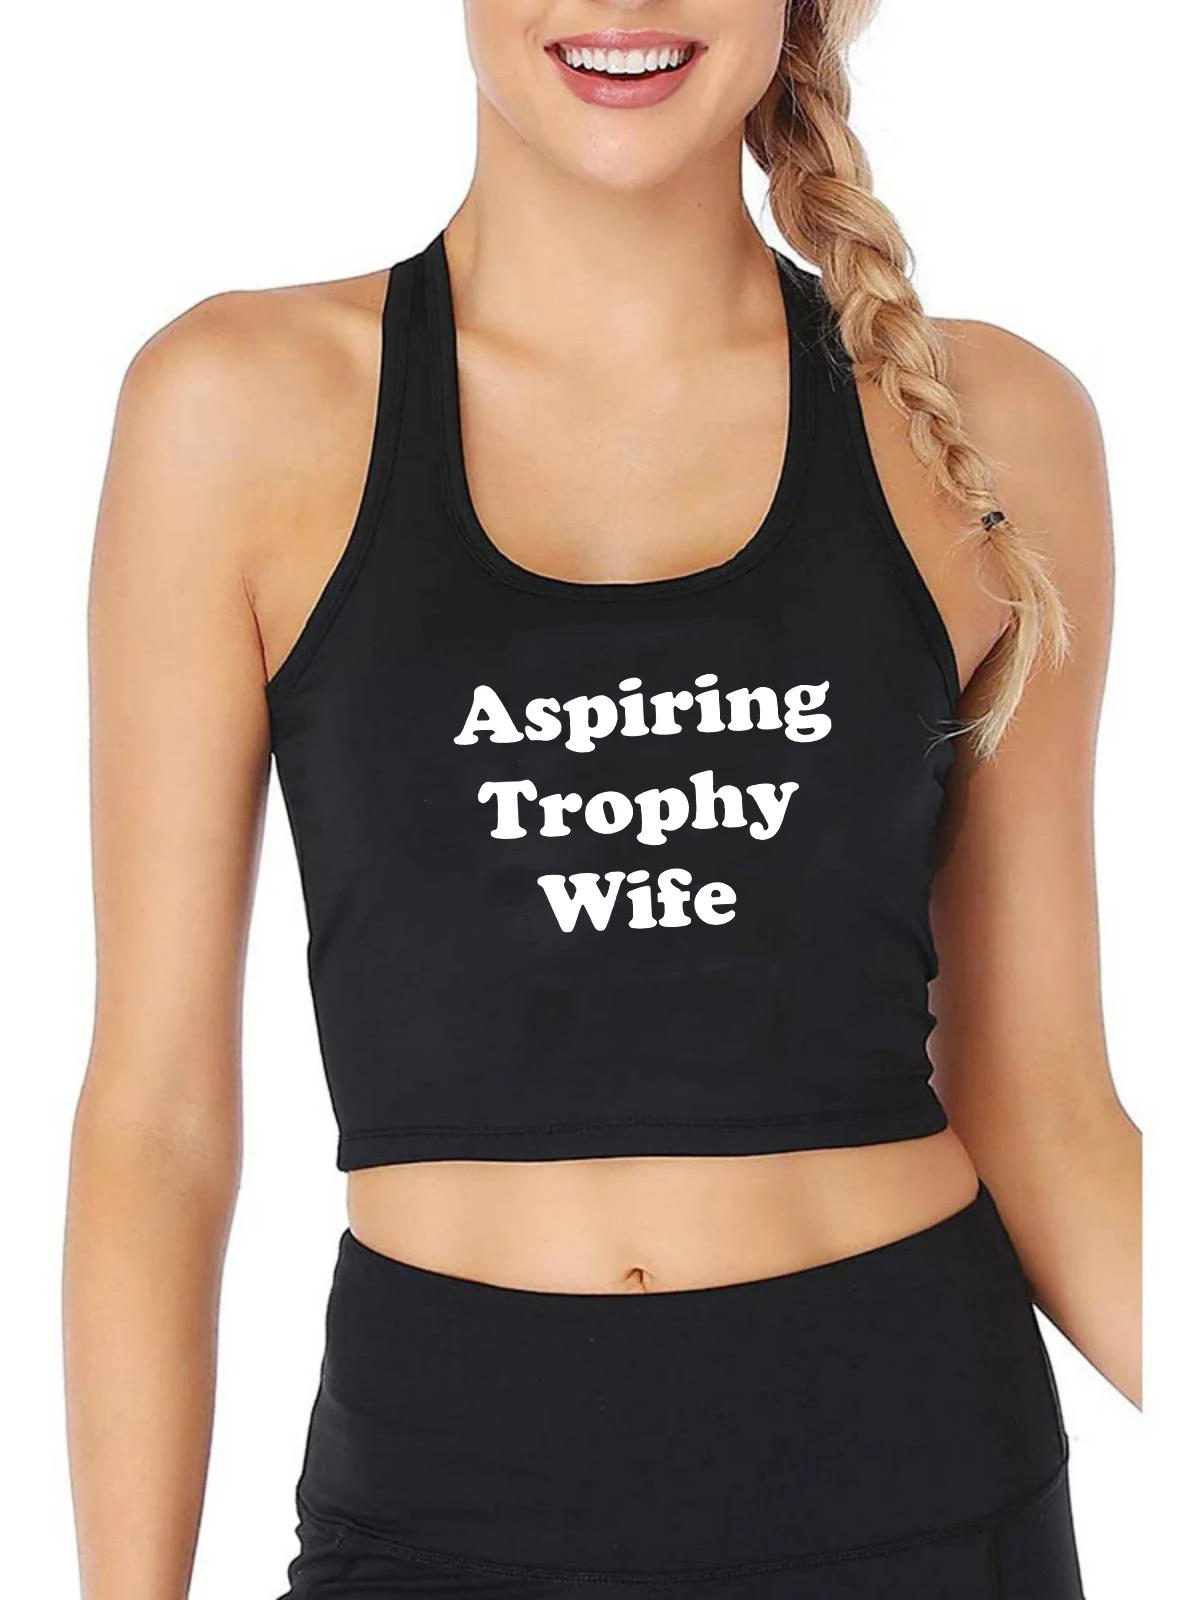 

Aspiring Trophy Wife Design Breathable Slim Fit Tank Tops Women's Trend Funny Sexy Crop Top Gym Training Camisole